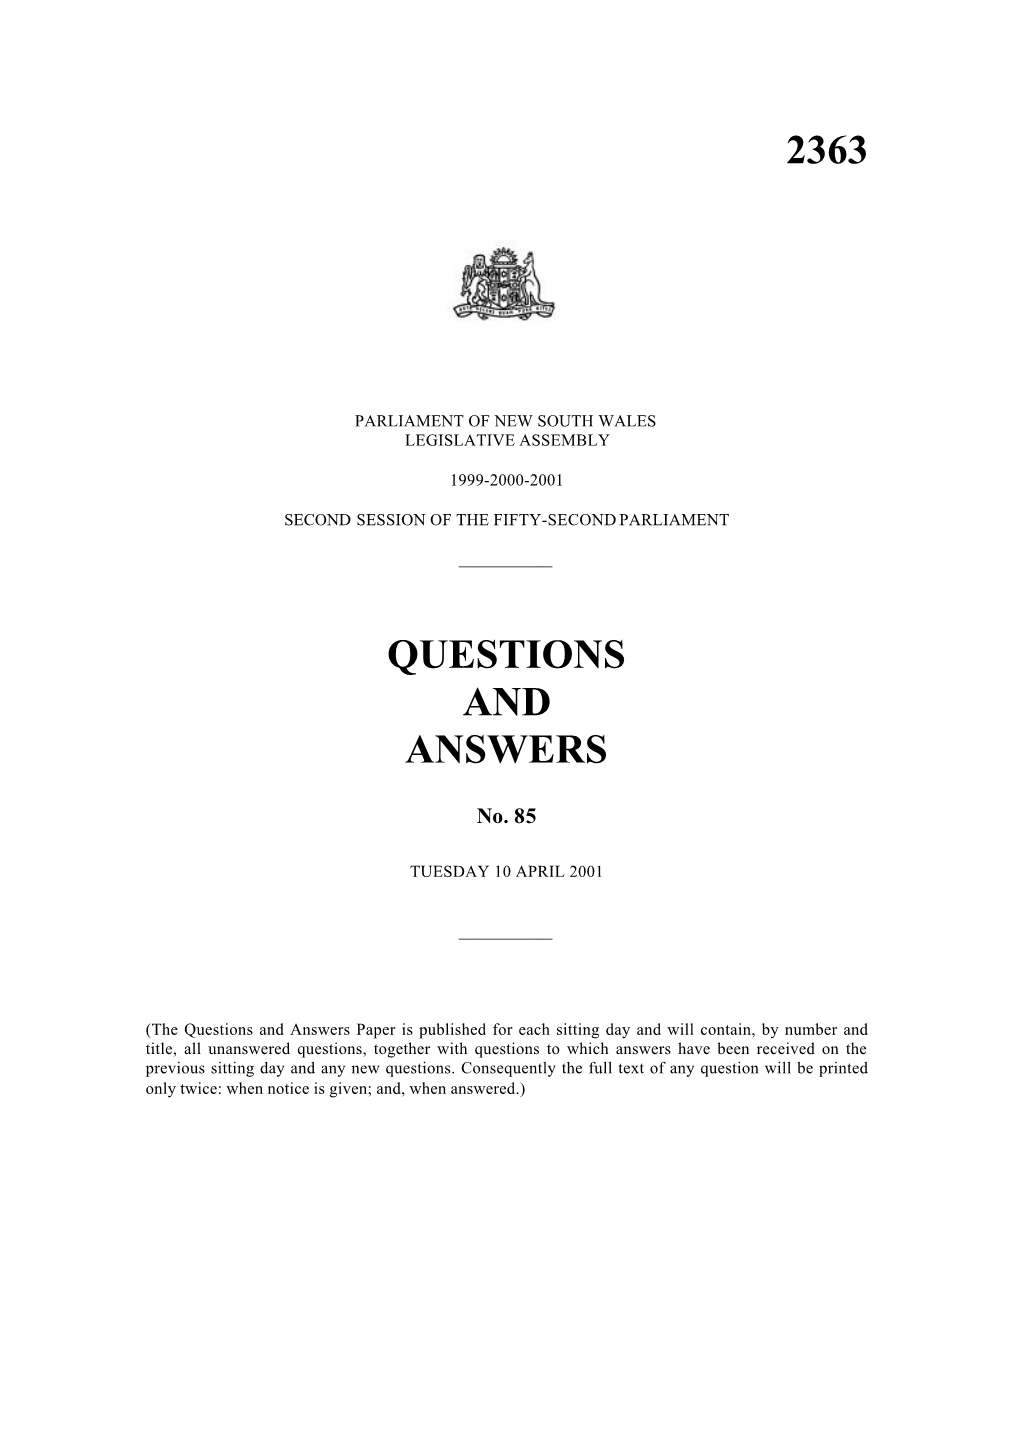 2363 Questions and Answers